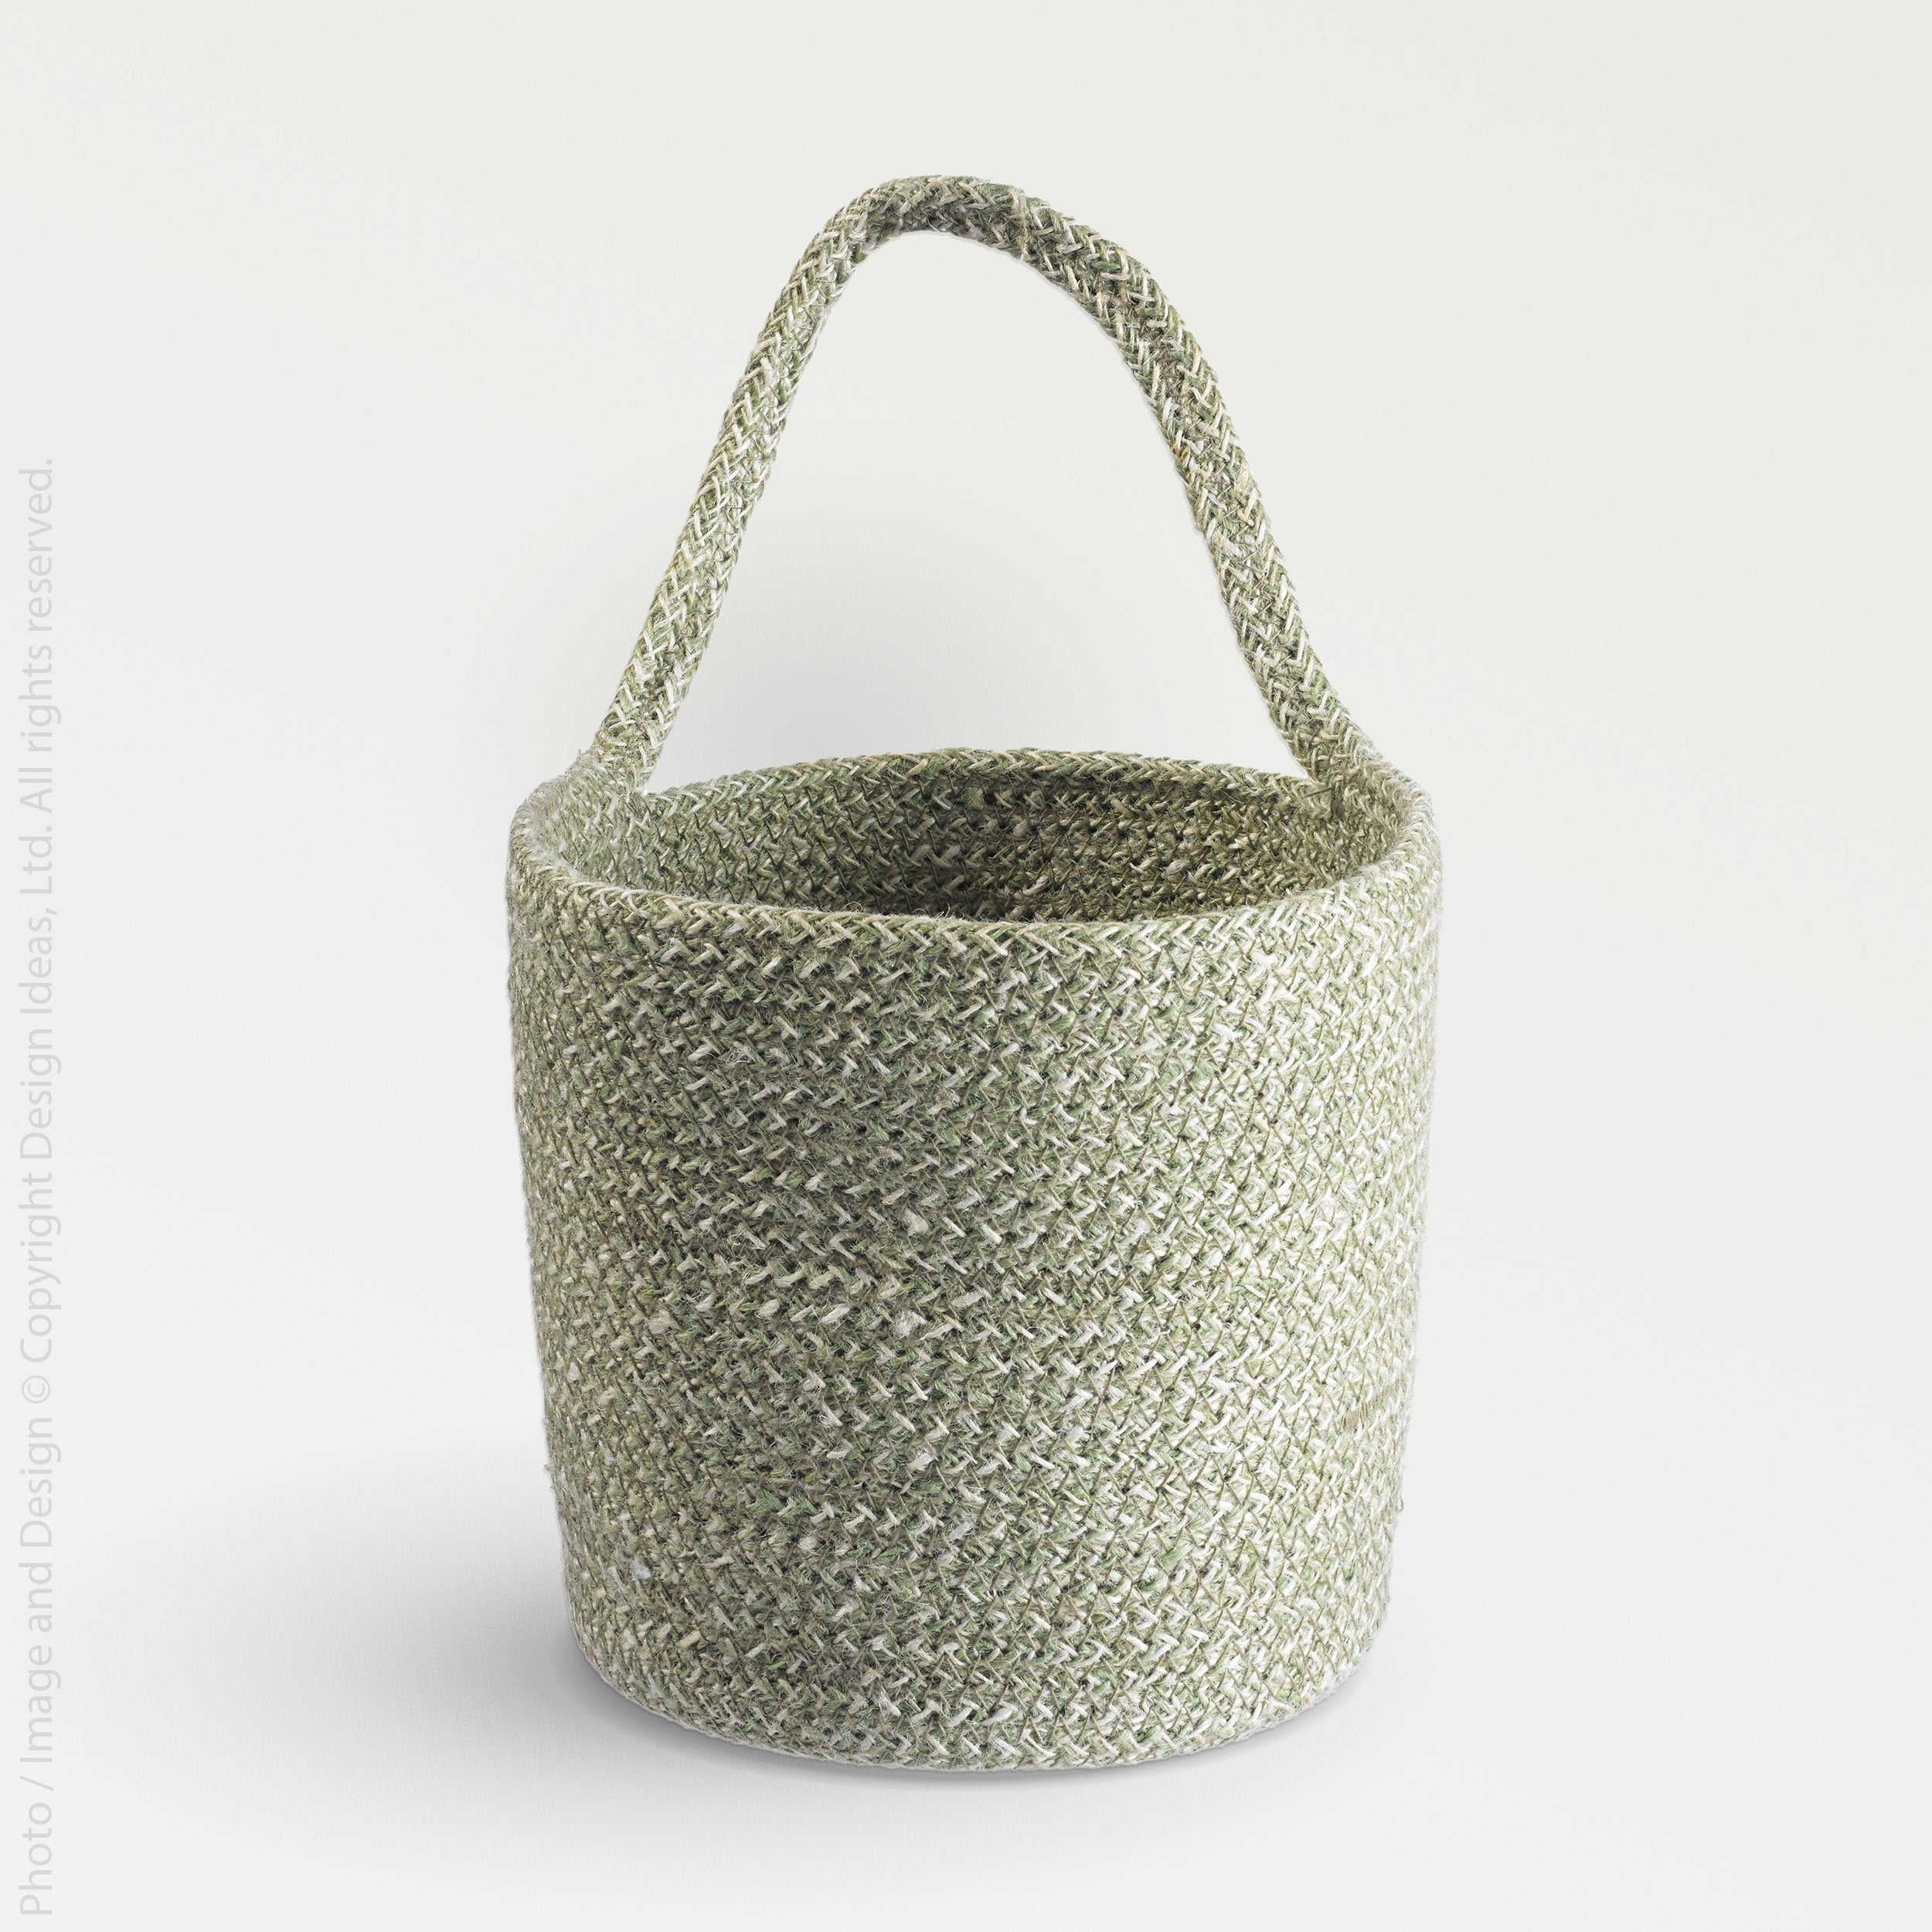 Melia™ hanging basket (6.3 x 7 x 6.5 in.) - Black | Image 7 | Premium Basket from the Melia collection | made with Jute for long lasting use | texxture